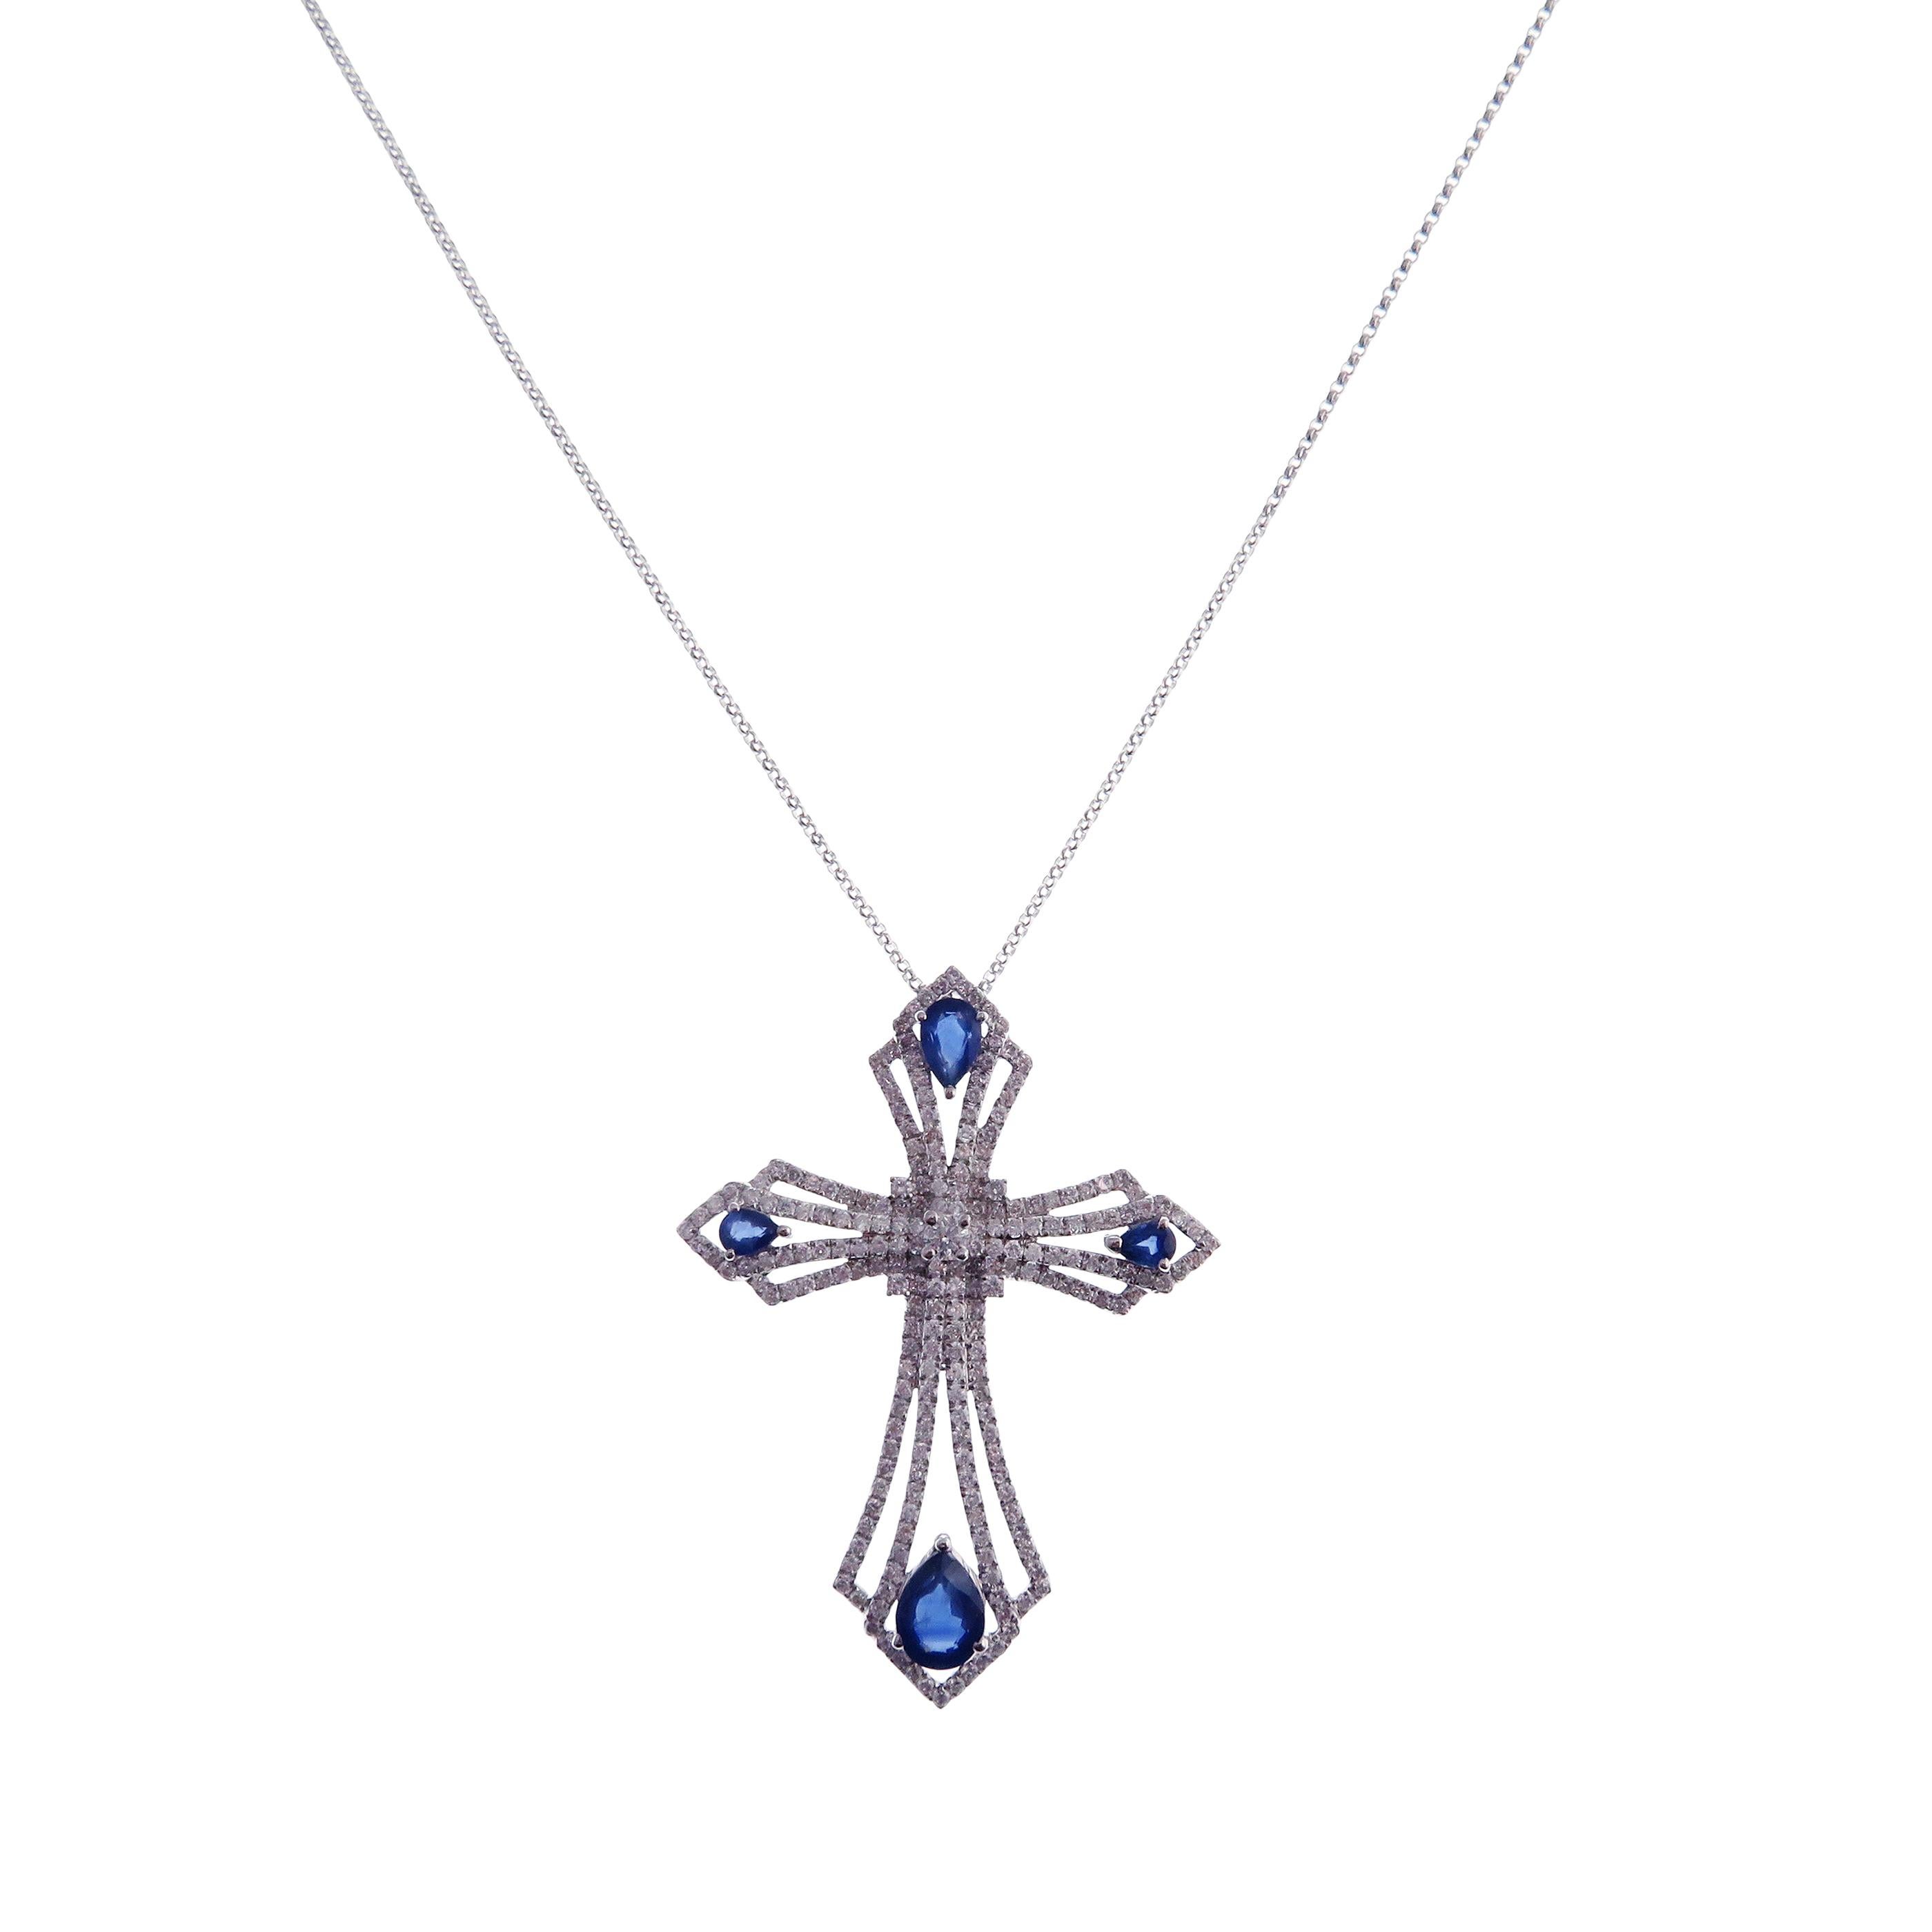 This cross motif necklace is crafted in 18-karat white gold, weighing approximately 1.90 total carats of SI Quality white diamond and 2.25 total carats of blue sapphires. 

Necklace is 16